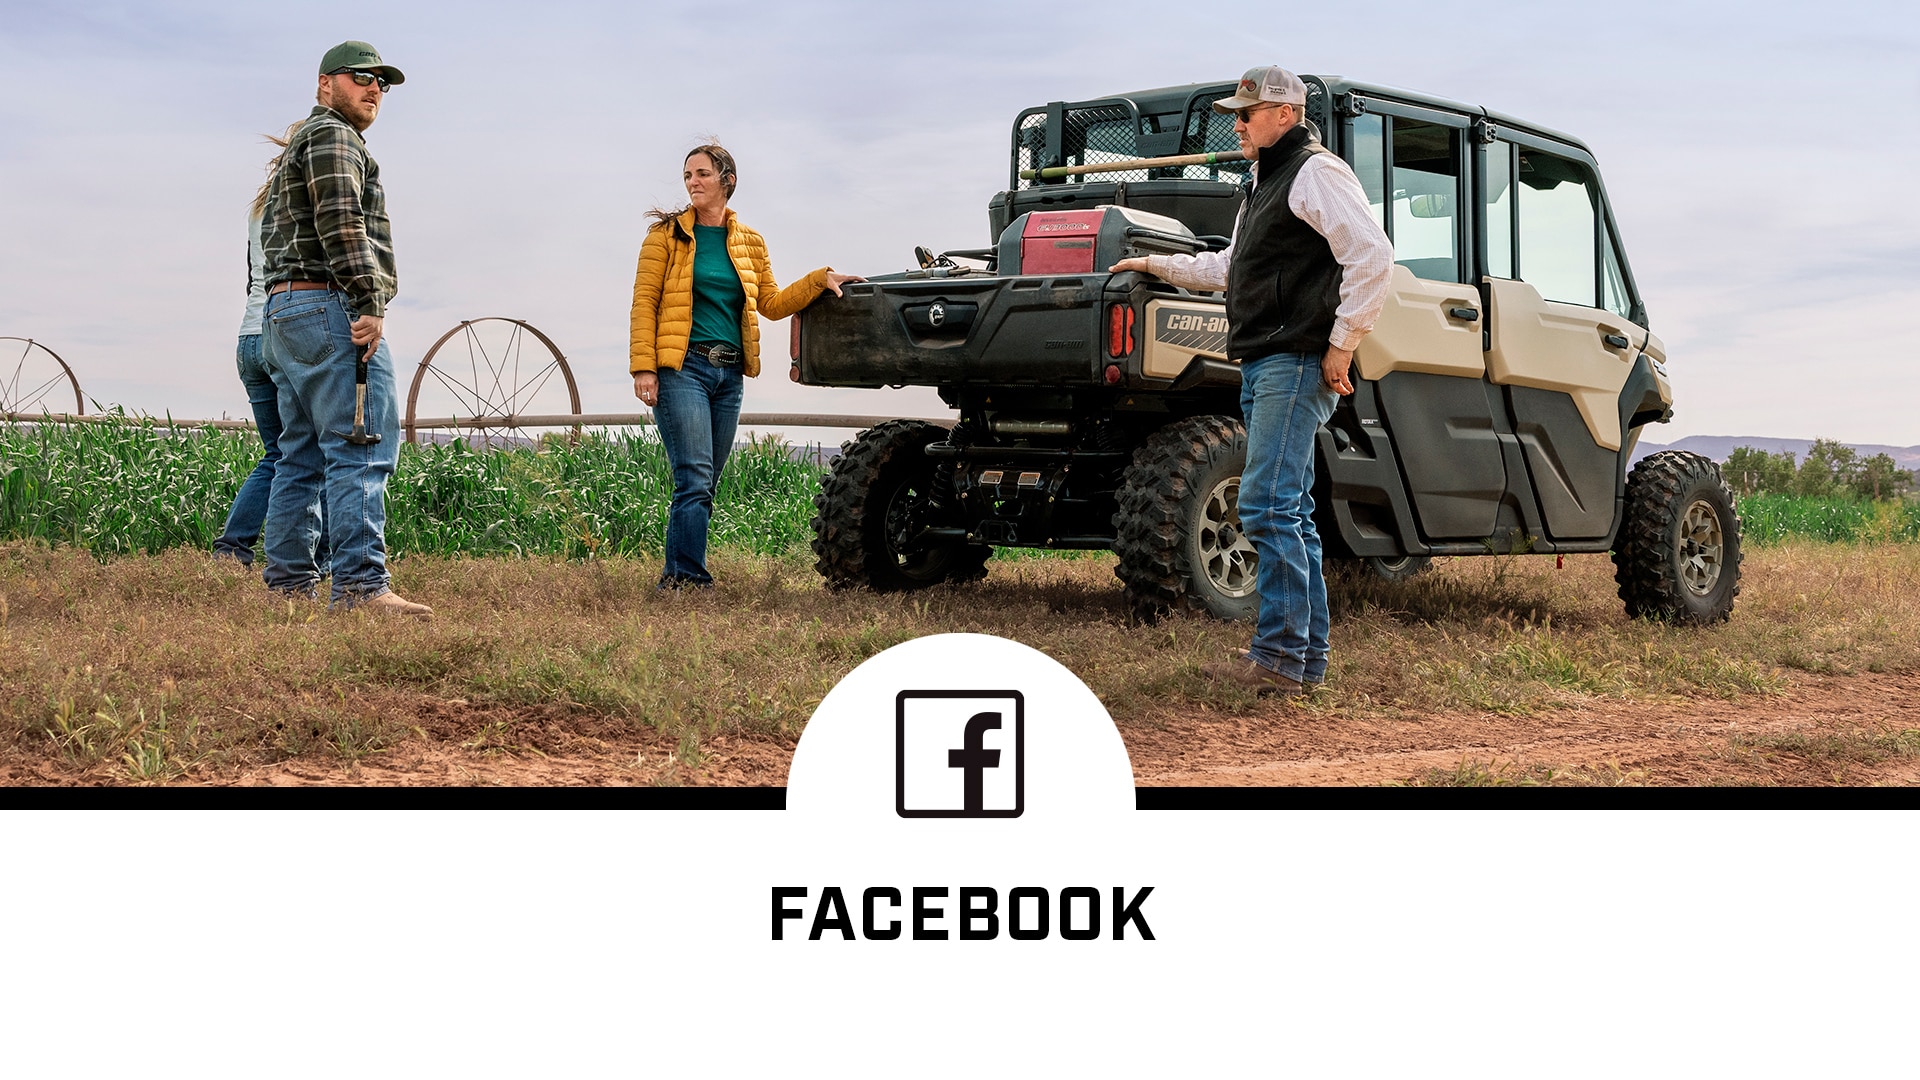 People stand around Can-Am Defender MAX and a Facebook social media logo